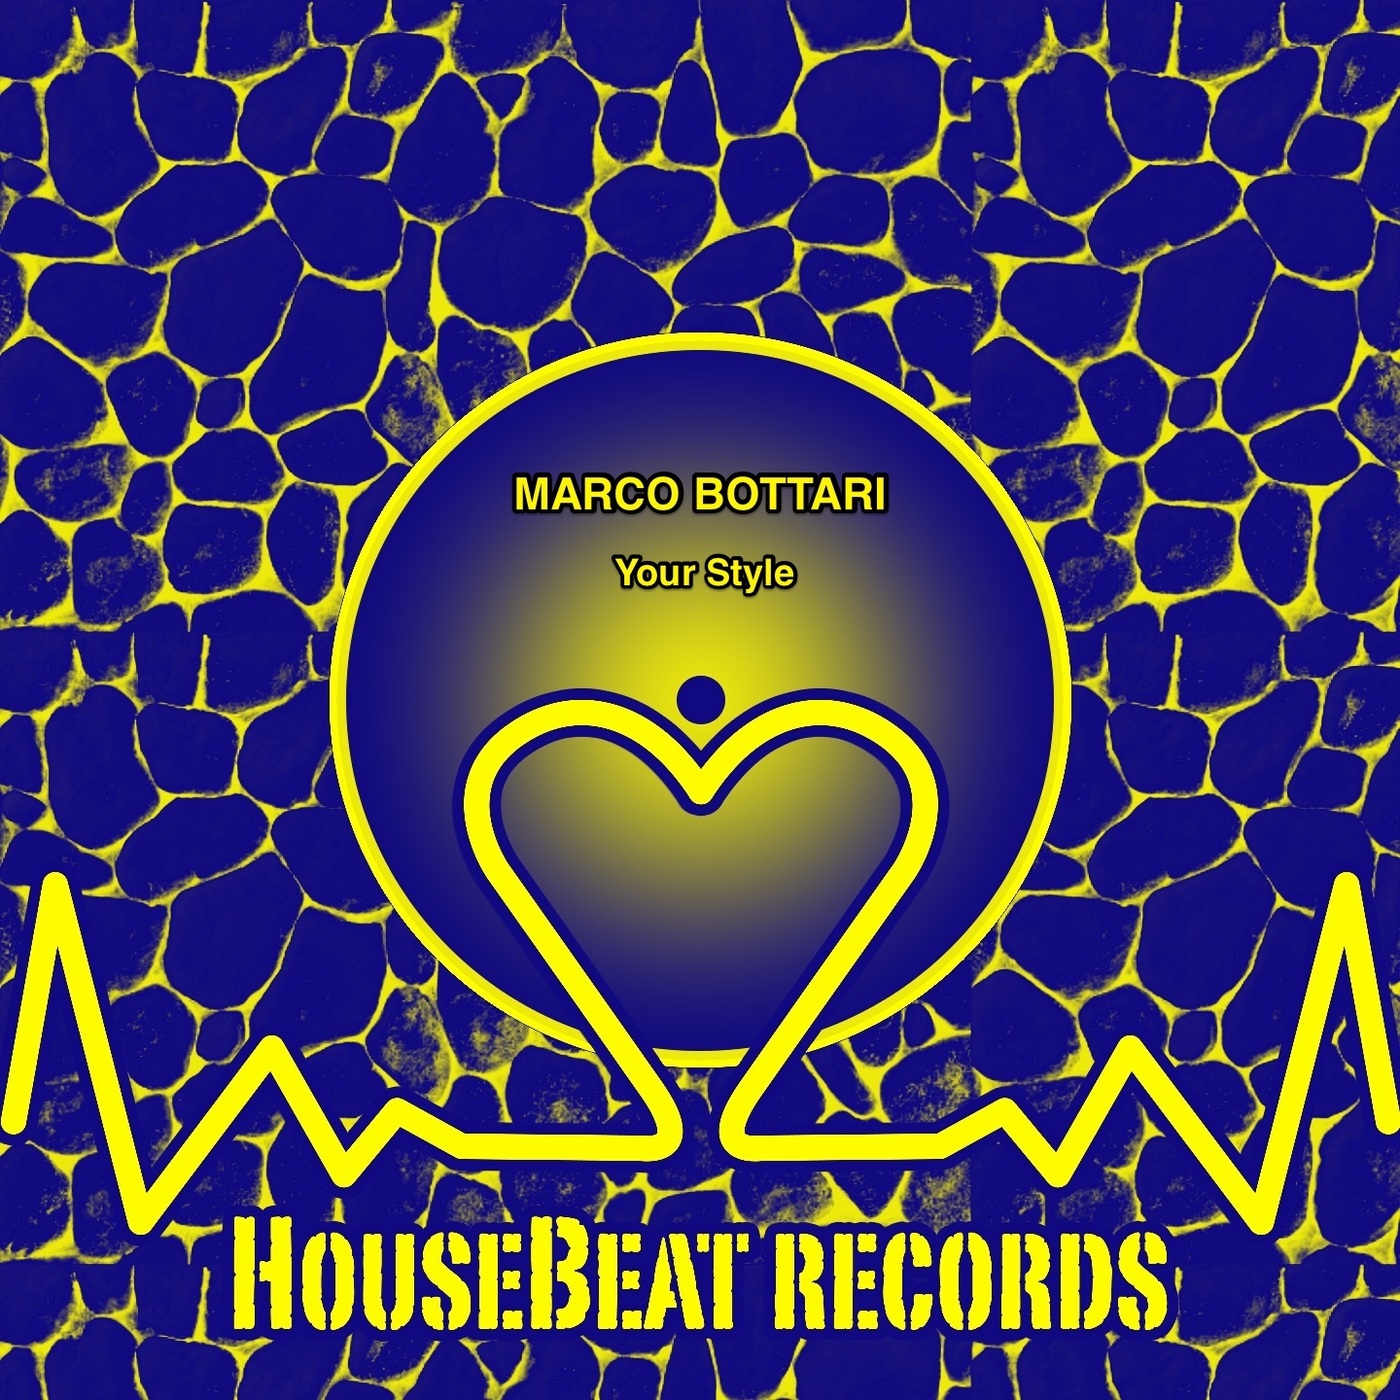 Marco Bottari - Your Style / HouseBeat Records